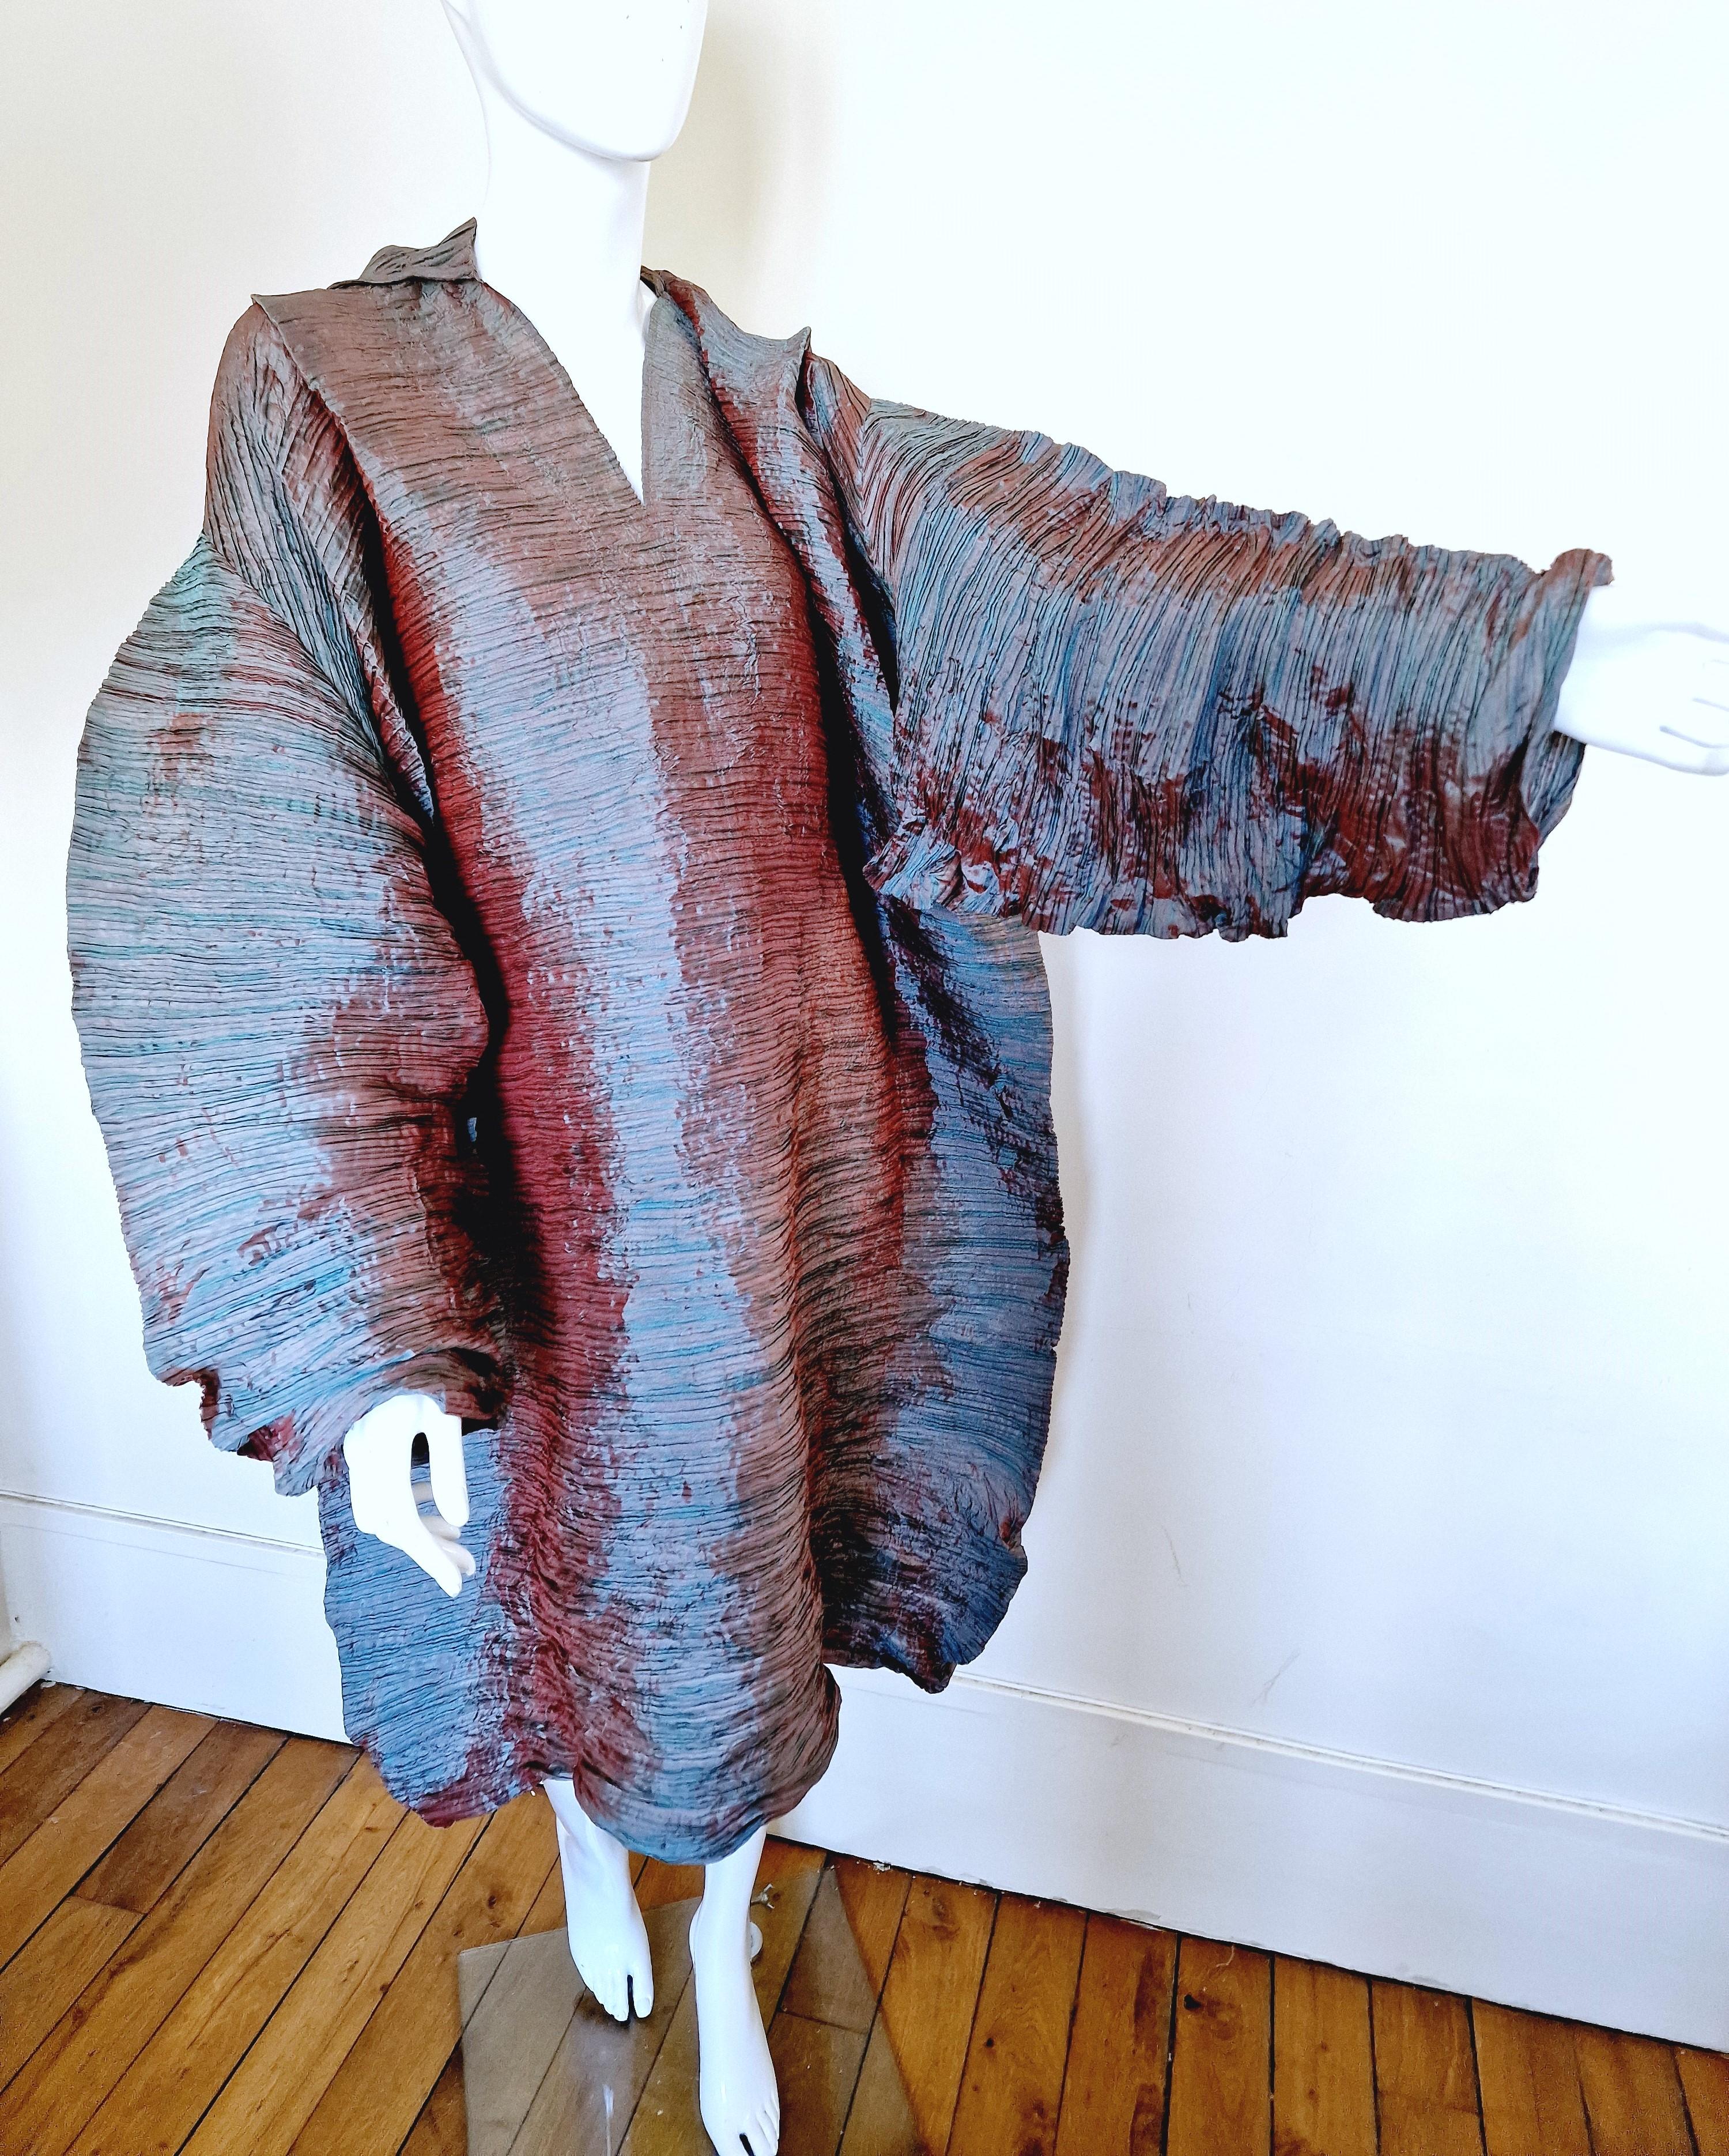 RARE Issey Miyake dress ! Like a sculpture!
Museum piece!
The collar can be opened or closed.
Huge extra long bell sleeves.

EXCELLENT condition!

SIZE
One size. It fits from XS to 3XL.
Marked size: Medium.
Length: 101 cm / 39.8 inch
Bust: 83 cm /